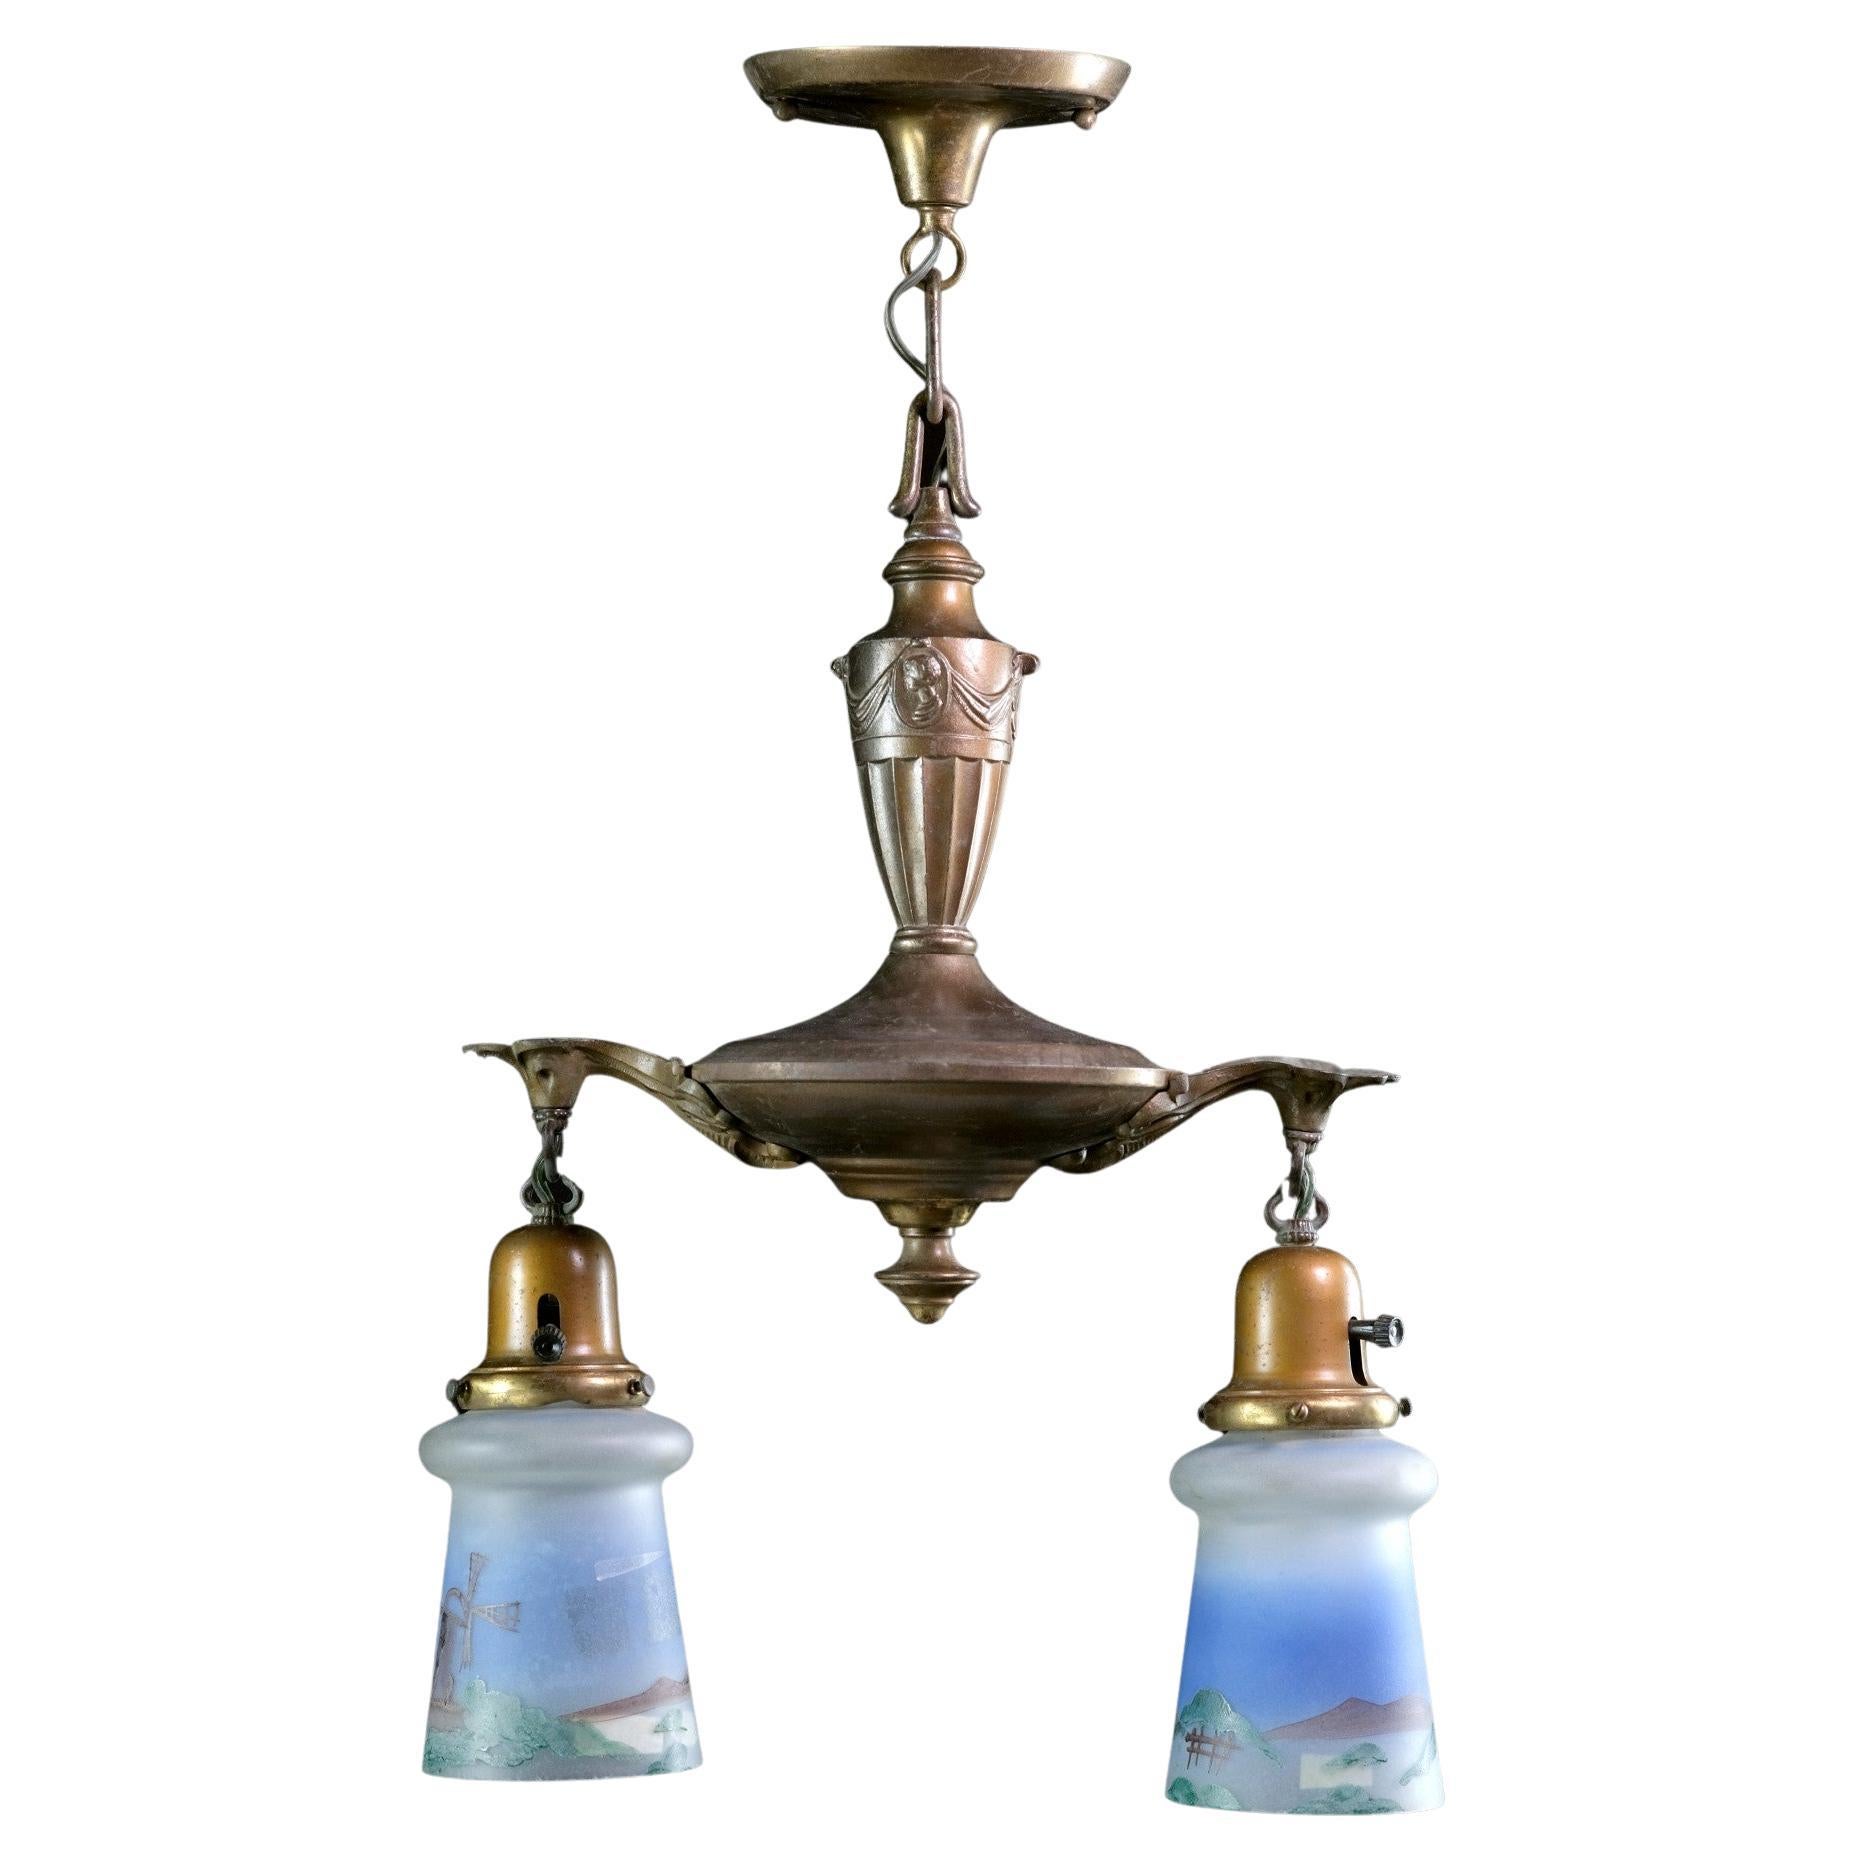 1910s Victorian Brass Pendant Light W/ 2 Hand Painted Glass Shades Scenic Design